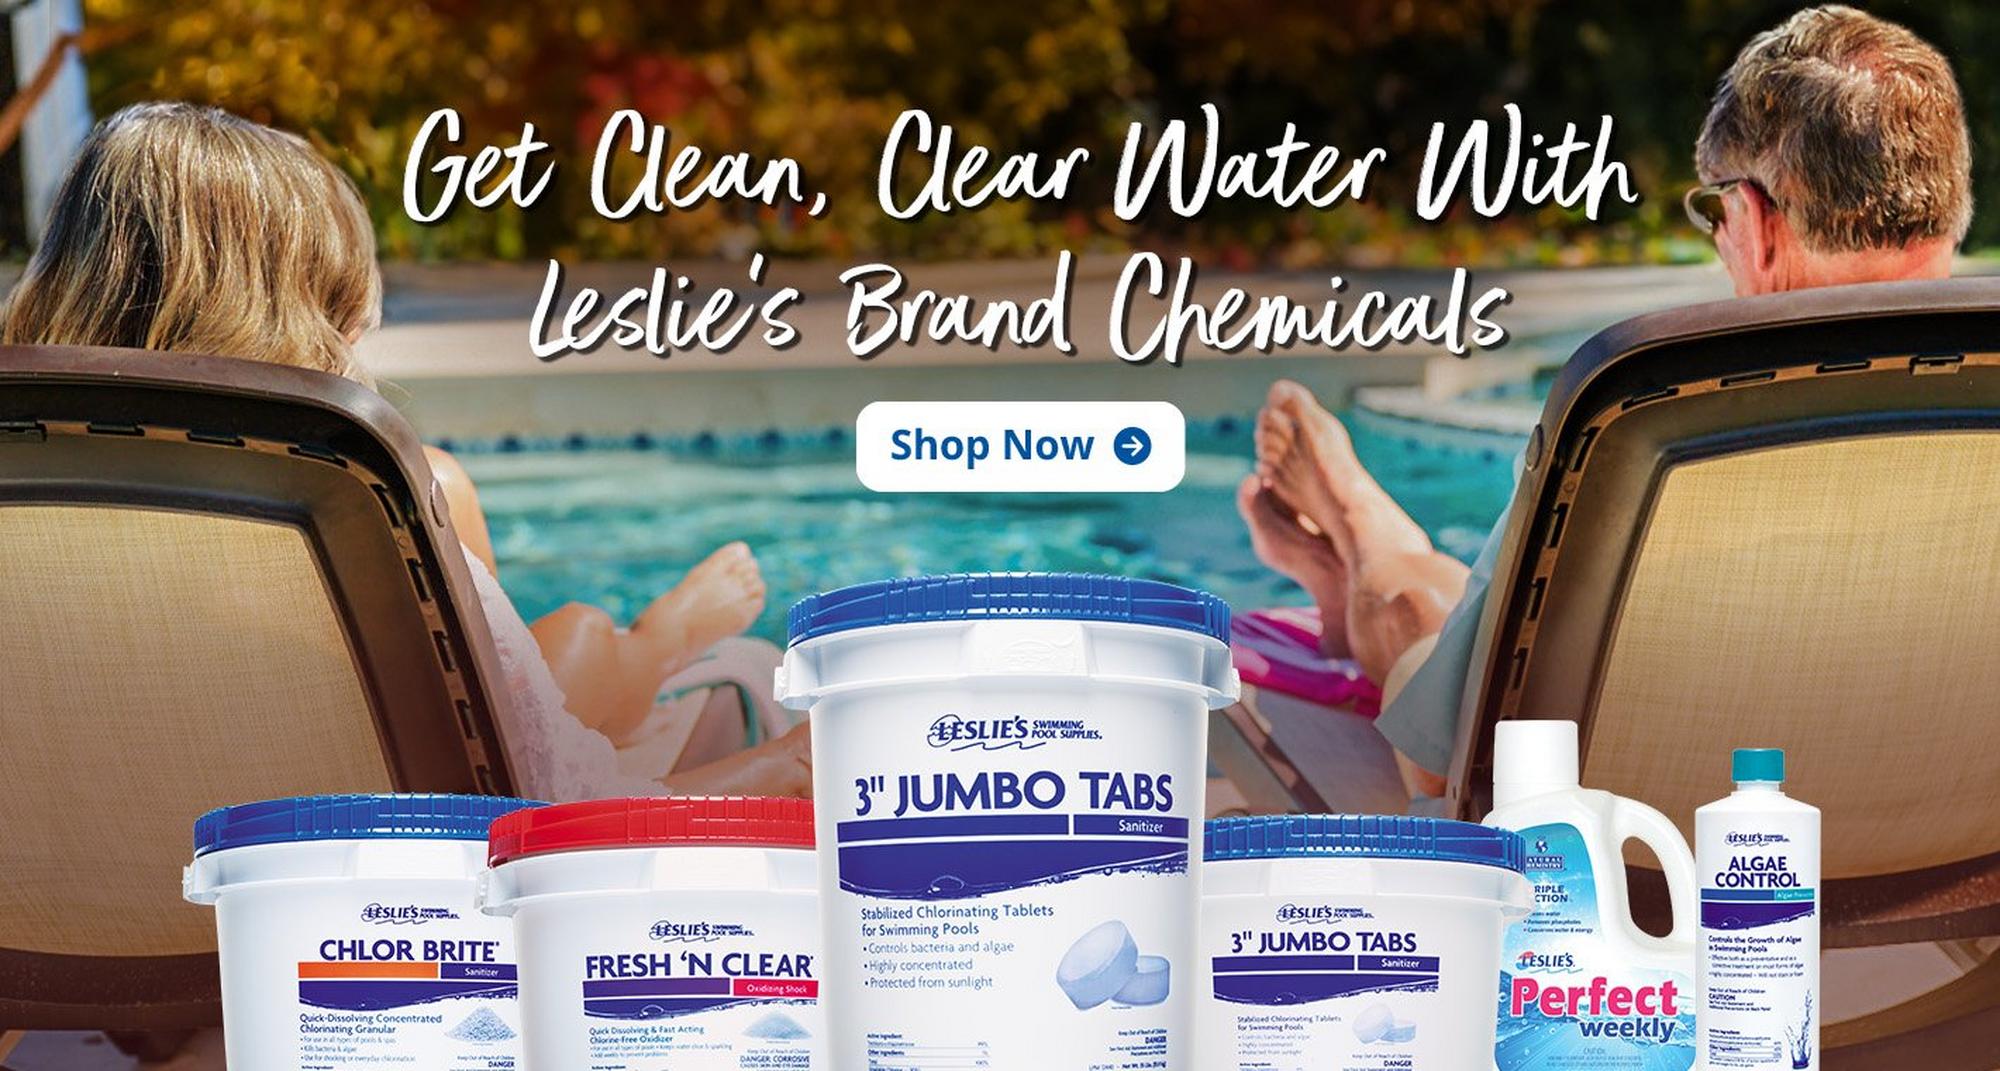 An image advertising Leslie's branded pool chemicals.